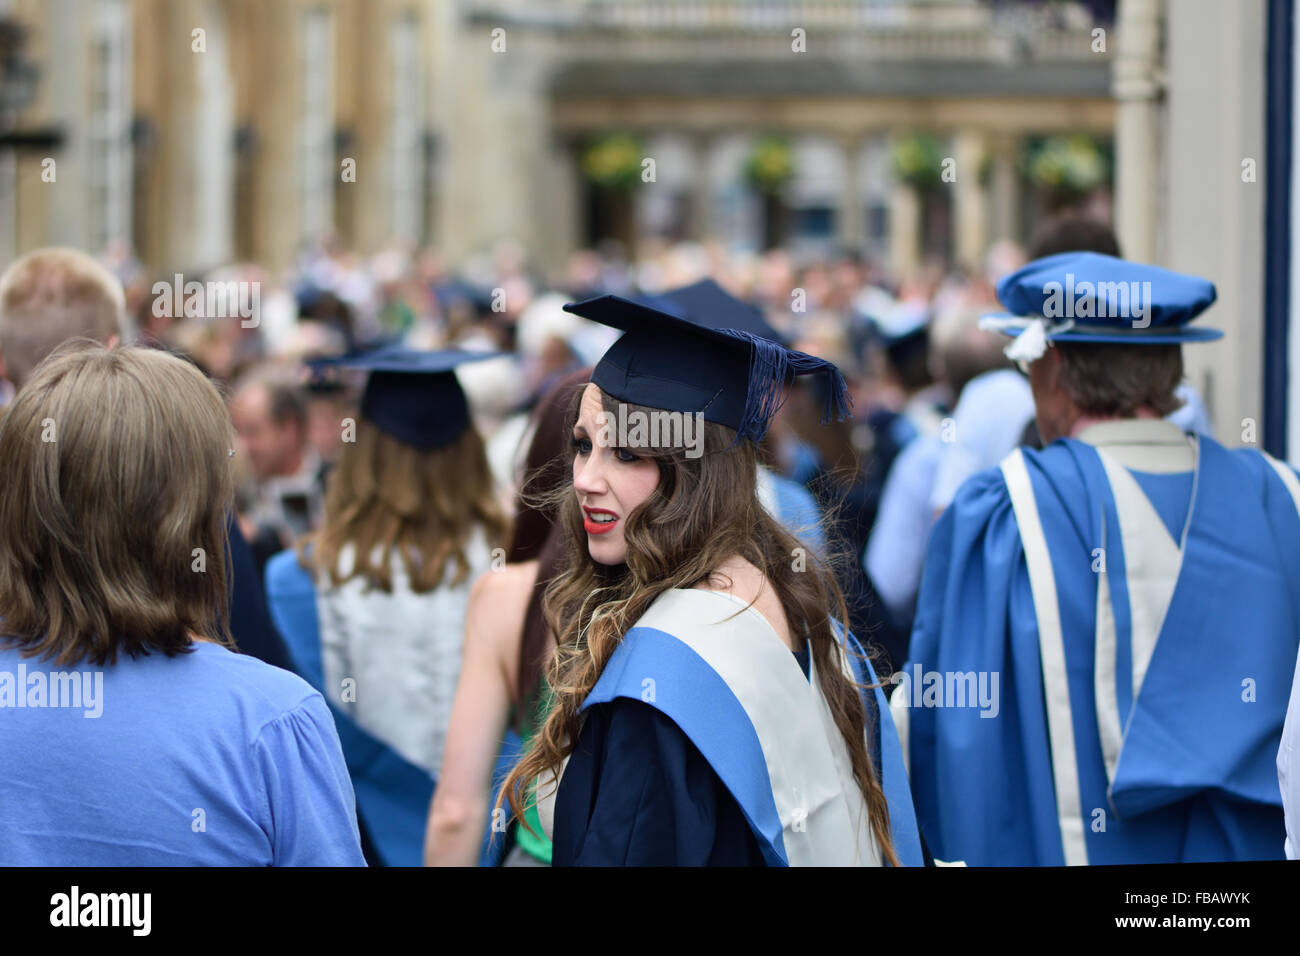 BATH, UK - JULY 16 2014 University of Bath graduands in blue gowns and mortar boards gather outside Bath Abbey Stock Photo